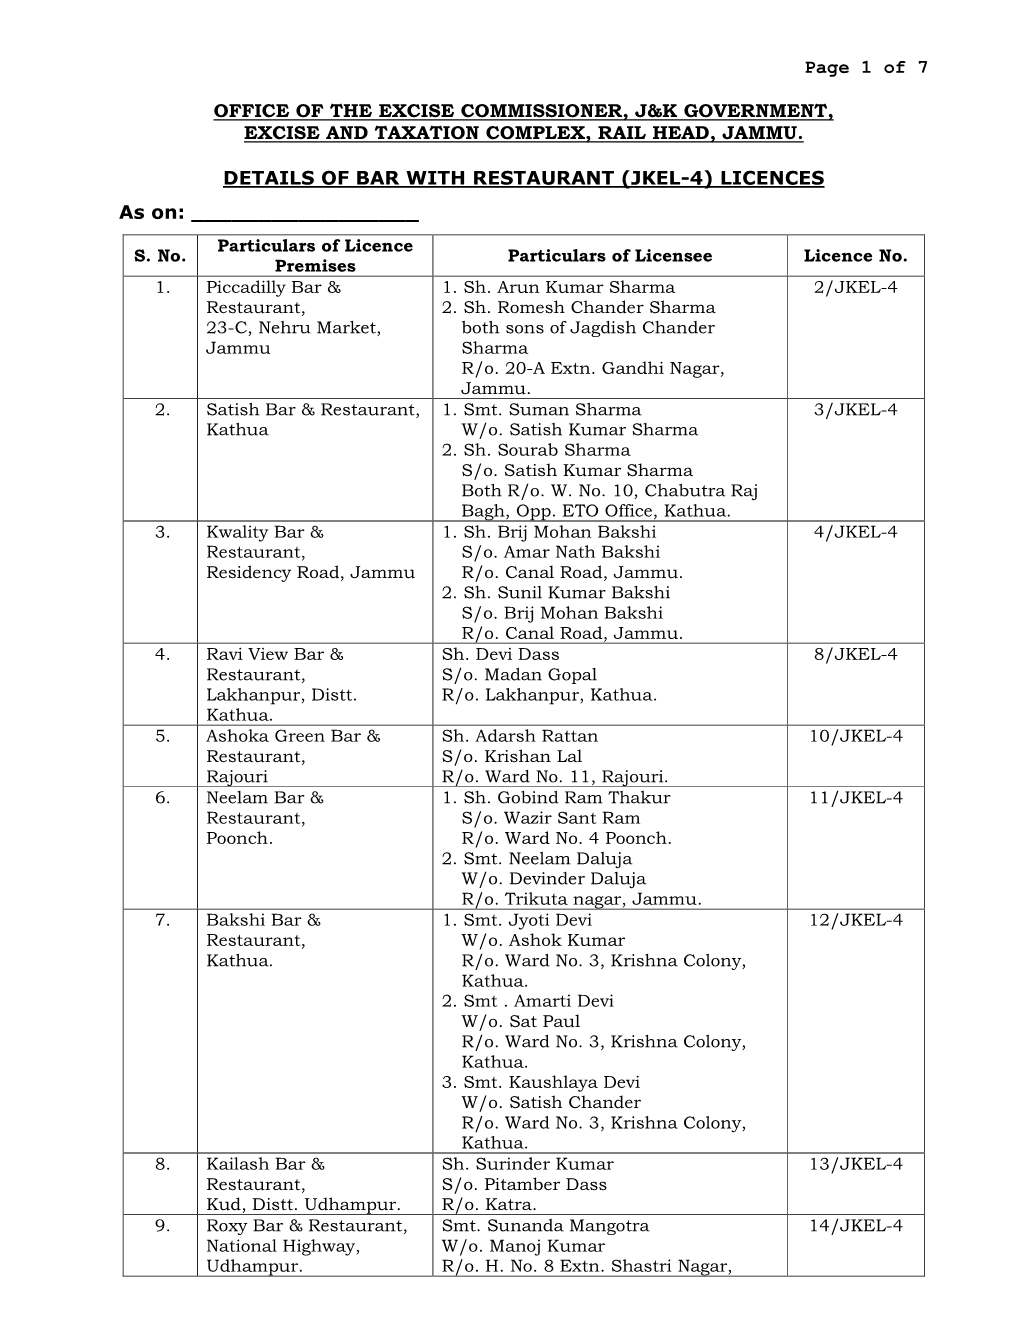 Page 1 of 7 OFFICE of the EXCISE COMMISSIONER, J&K